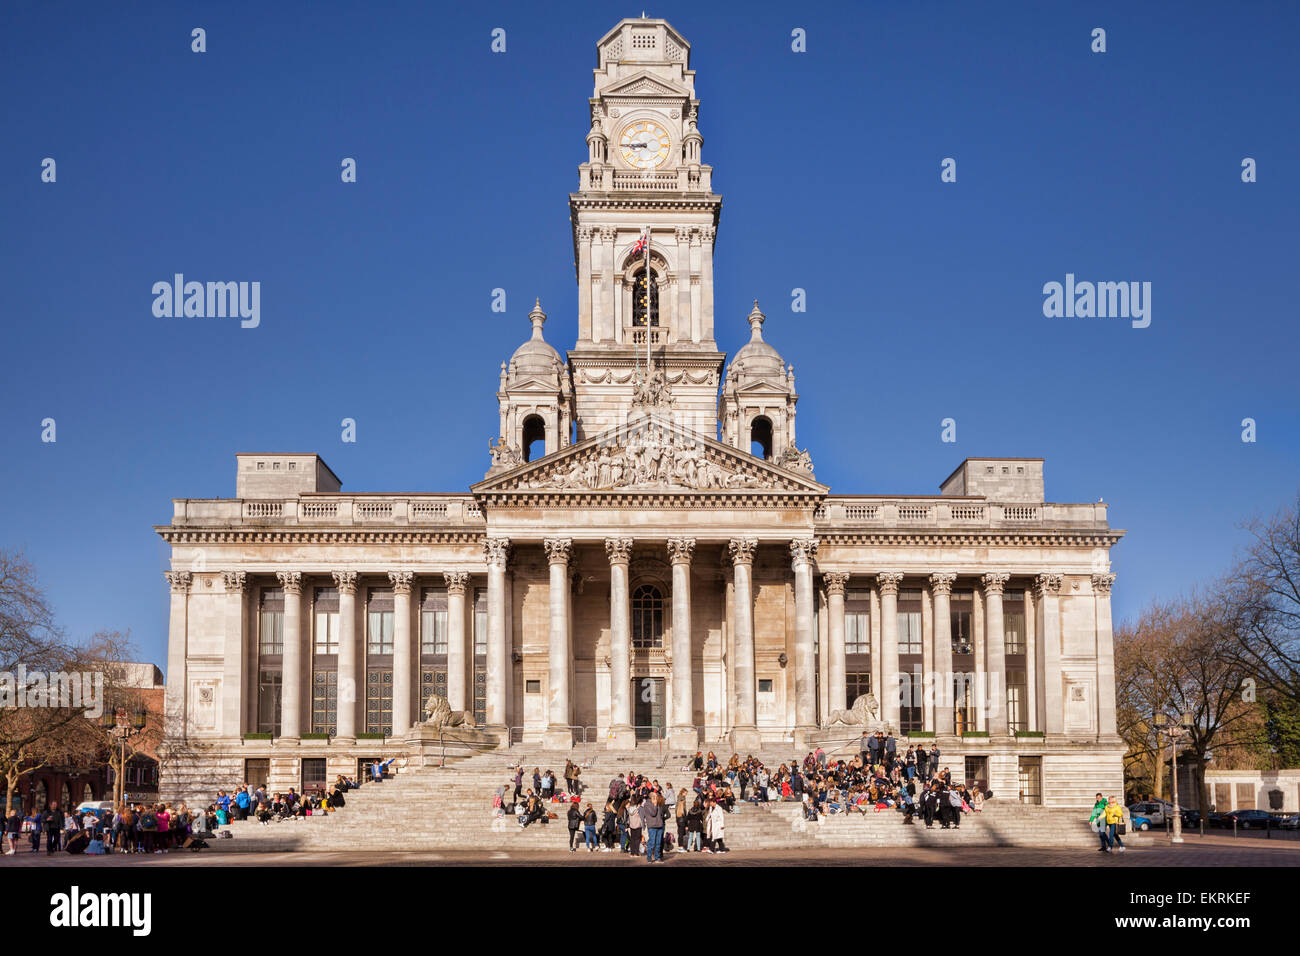 Portsmouth Guildhall, with crowds of people on the steps. Portsmouth, Hampshire, England. Stock Photo